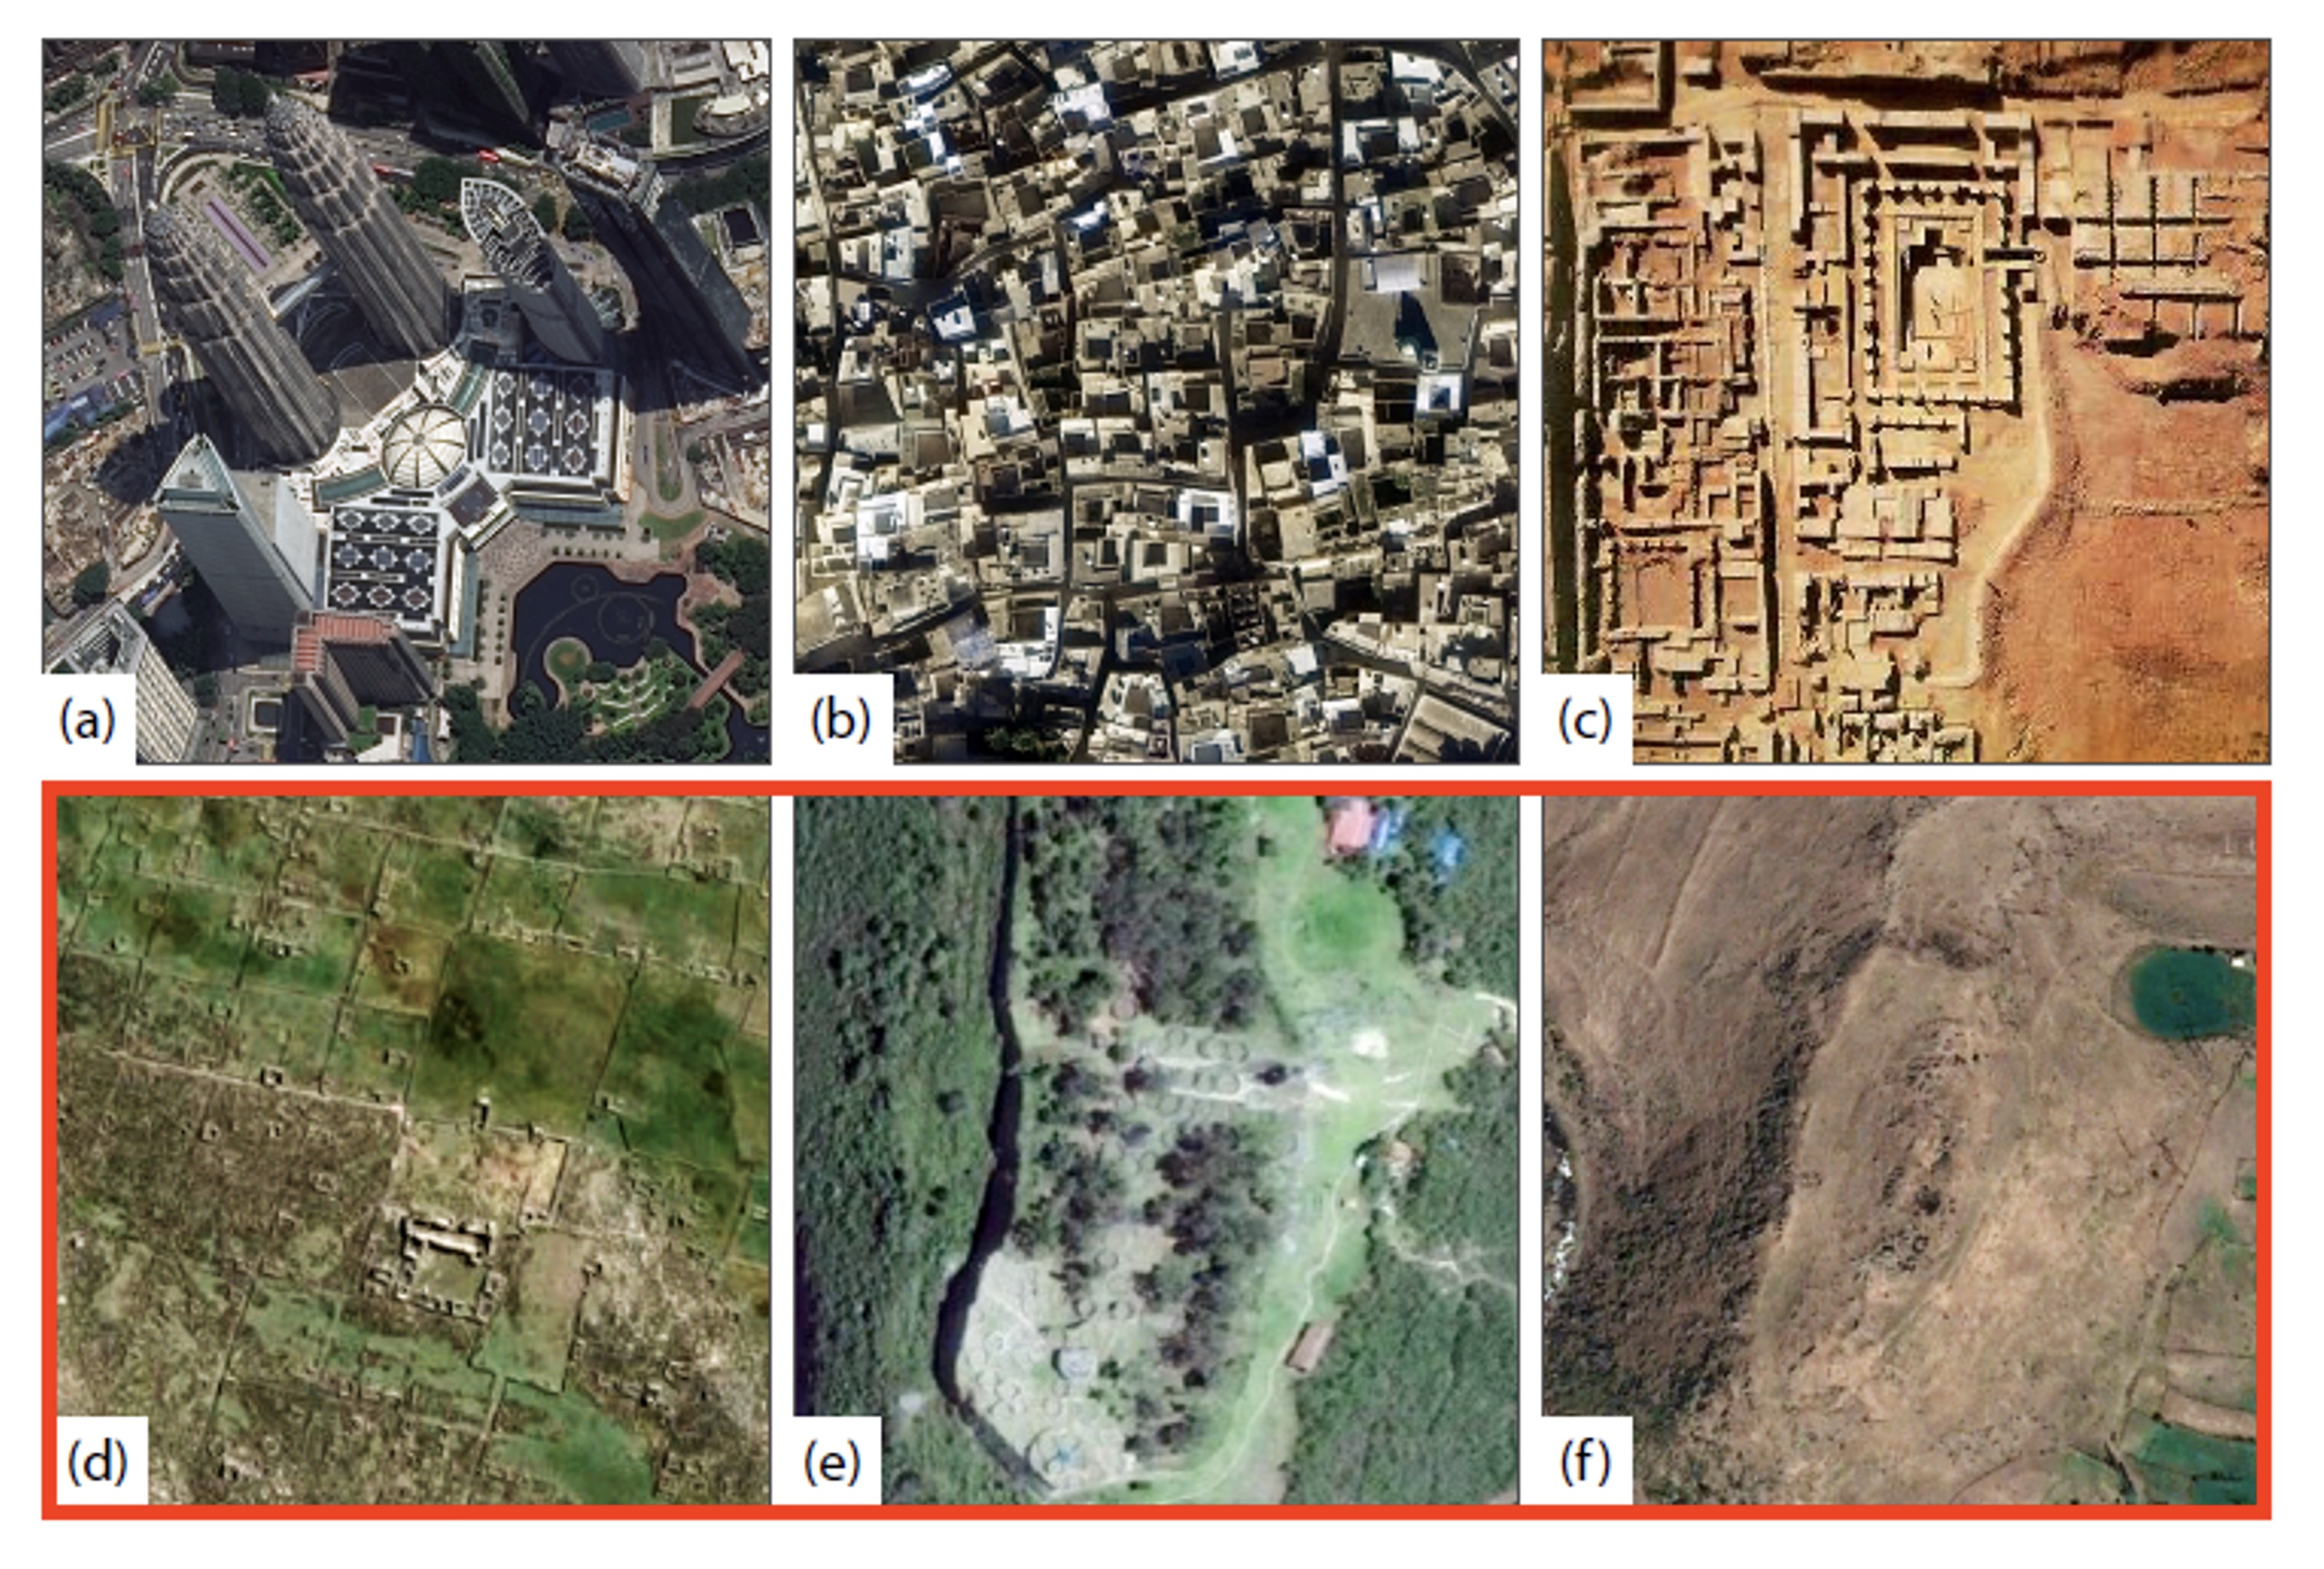 Figure 1: Complex, structured architectural loci, spanning well-preserved (top row) to increasingly sparse archaeological sites (bottom row). The proposed generative modeling will be developed and verified at sites (d-f) in Peru and Armenia. (a) Kuala Lampur; (b) Sousse, Tunisia; (c) Mohenjo Daro, Pakistan; (d) Mawchu Llacta planned town, Peur; (e) Kuelap, Peru, hilltop site; (f) Aparani Berd fortress, Armenia.